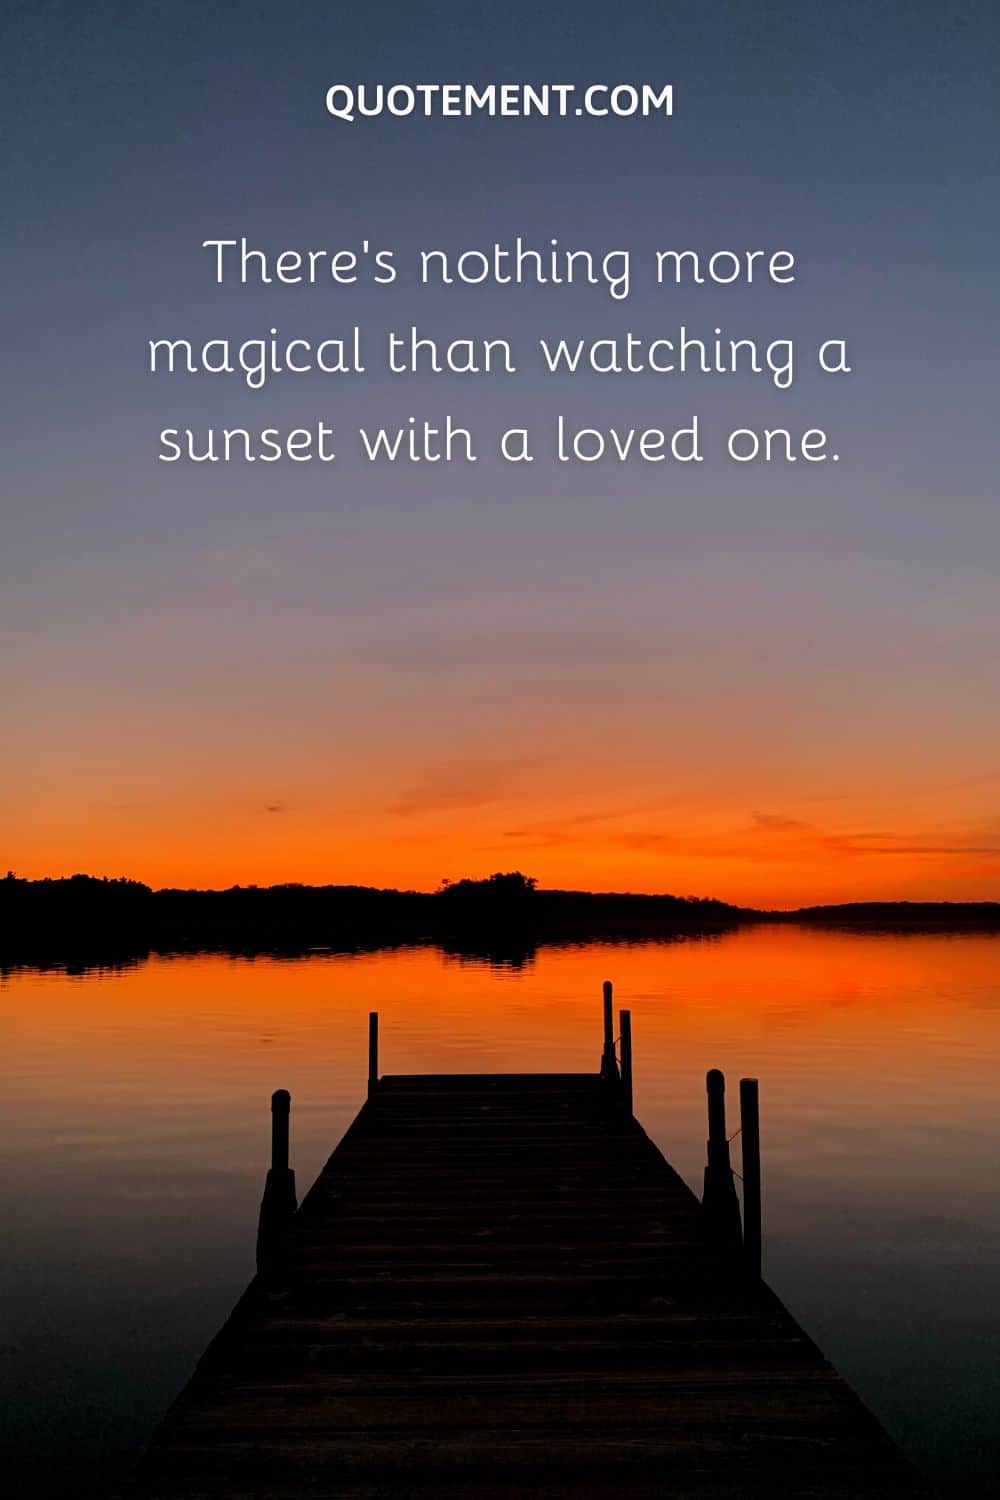 There’s nothing more magical than watching a sunset with a loved one.